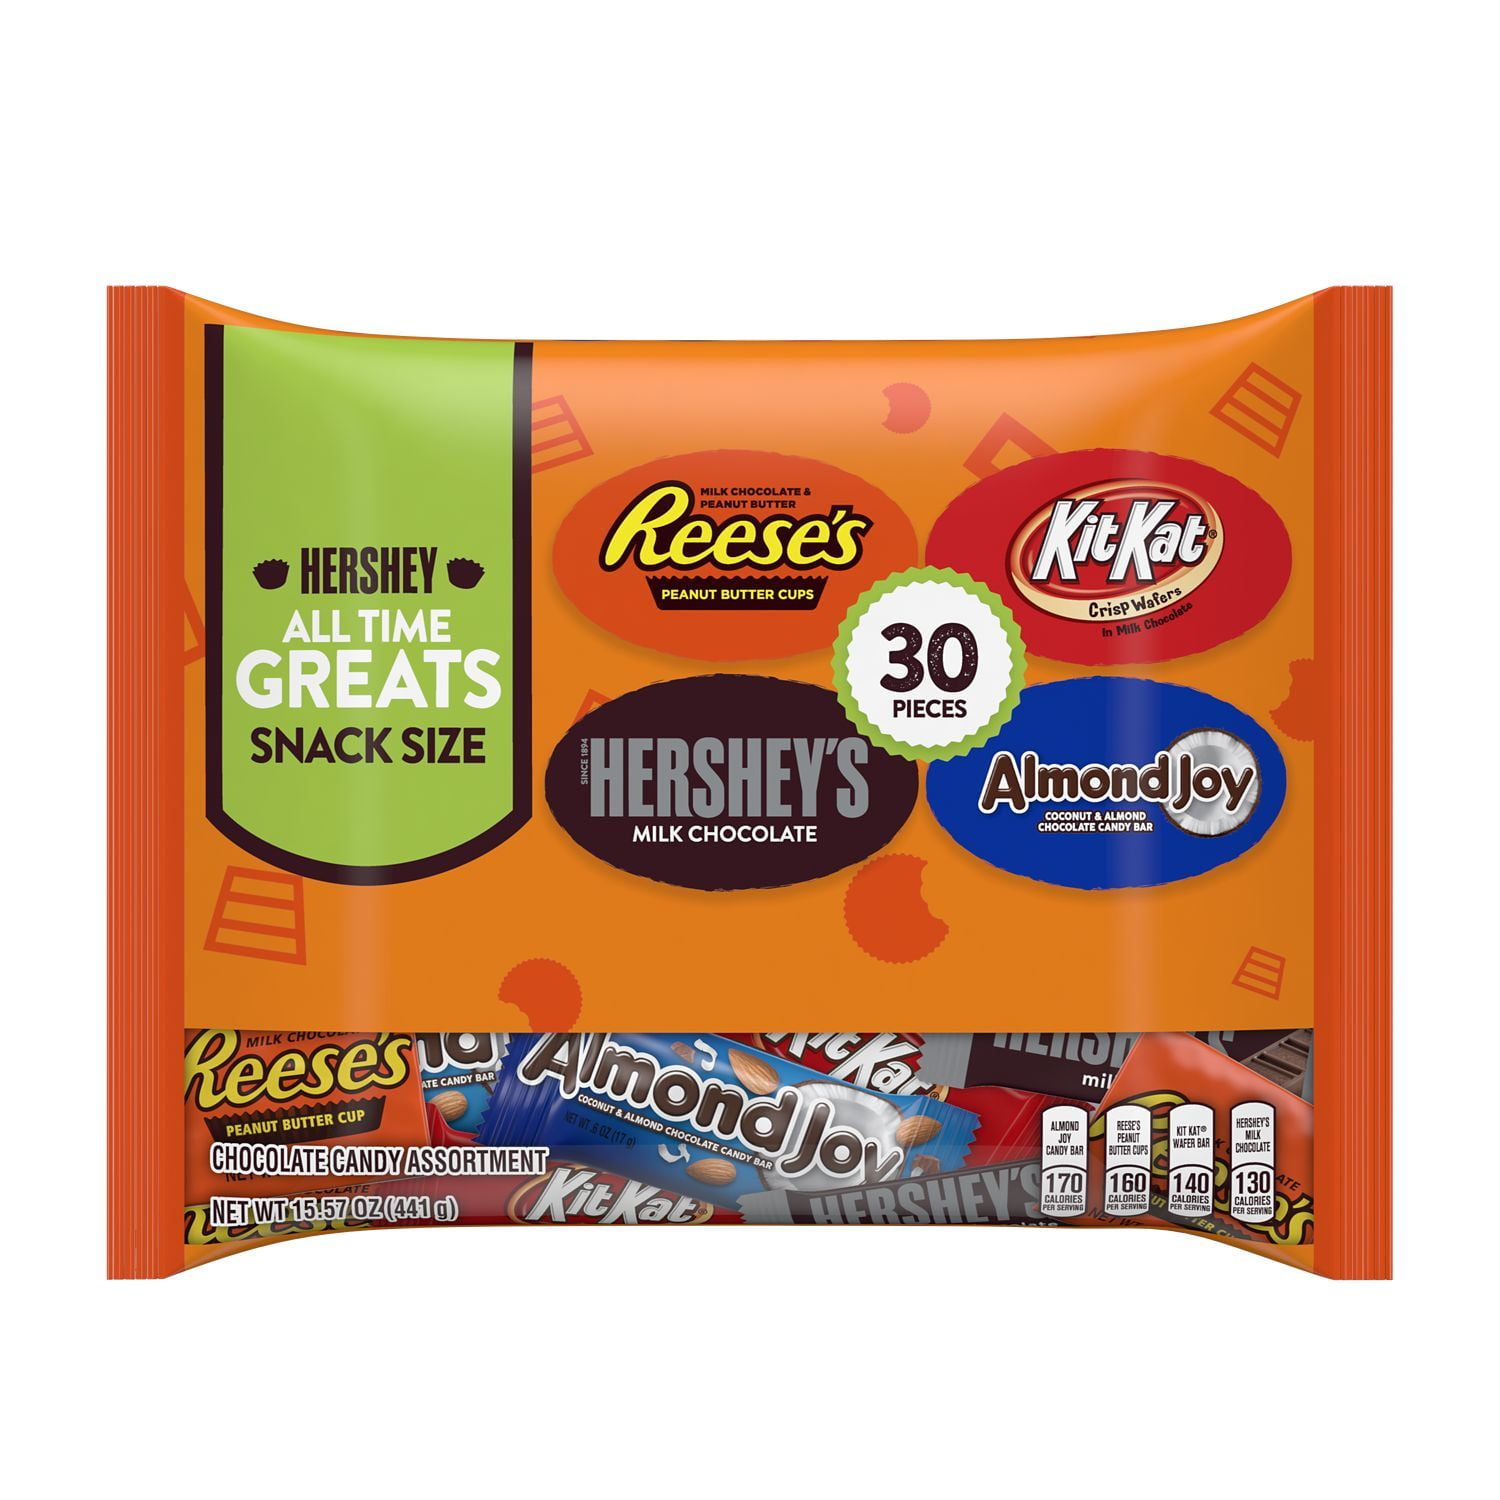 Hershey, All Time Greats Chocolate Assortment Snack Size Candy, 15.57 oz, Variety Bag (30 Pieces)